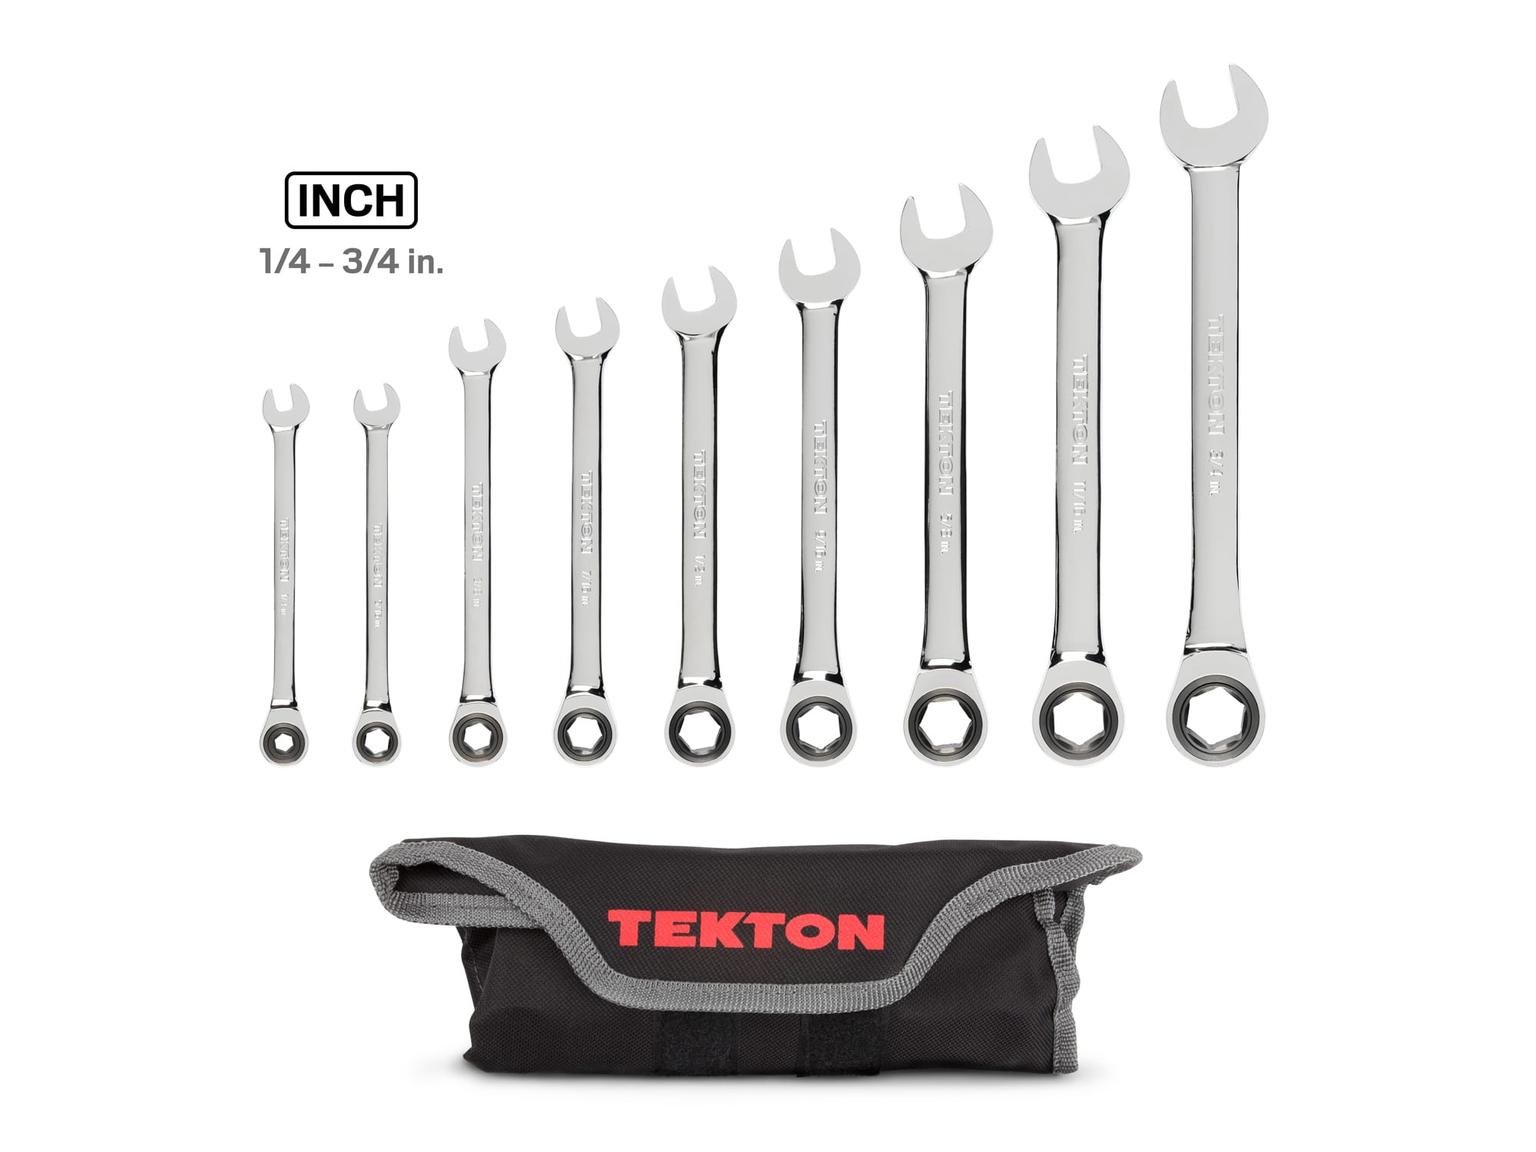 TEKTON WRN53087-T Ratcheting Combination Wrench Set with Pouch, 9-Piece (1/4-3/4 in.)